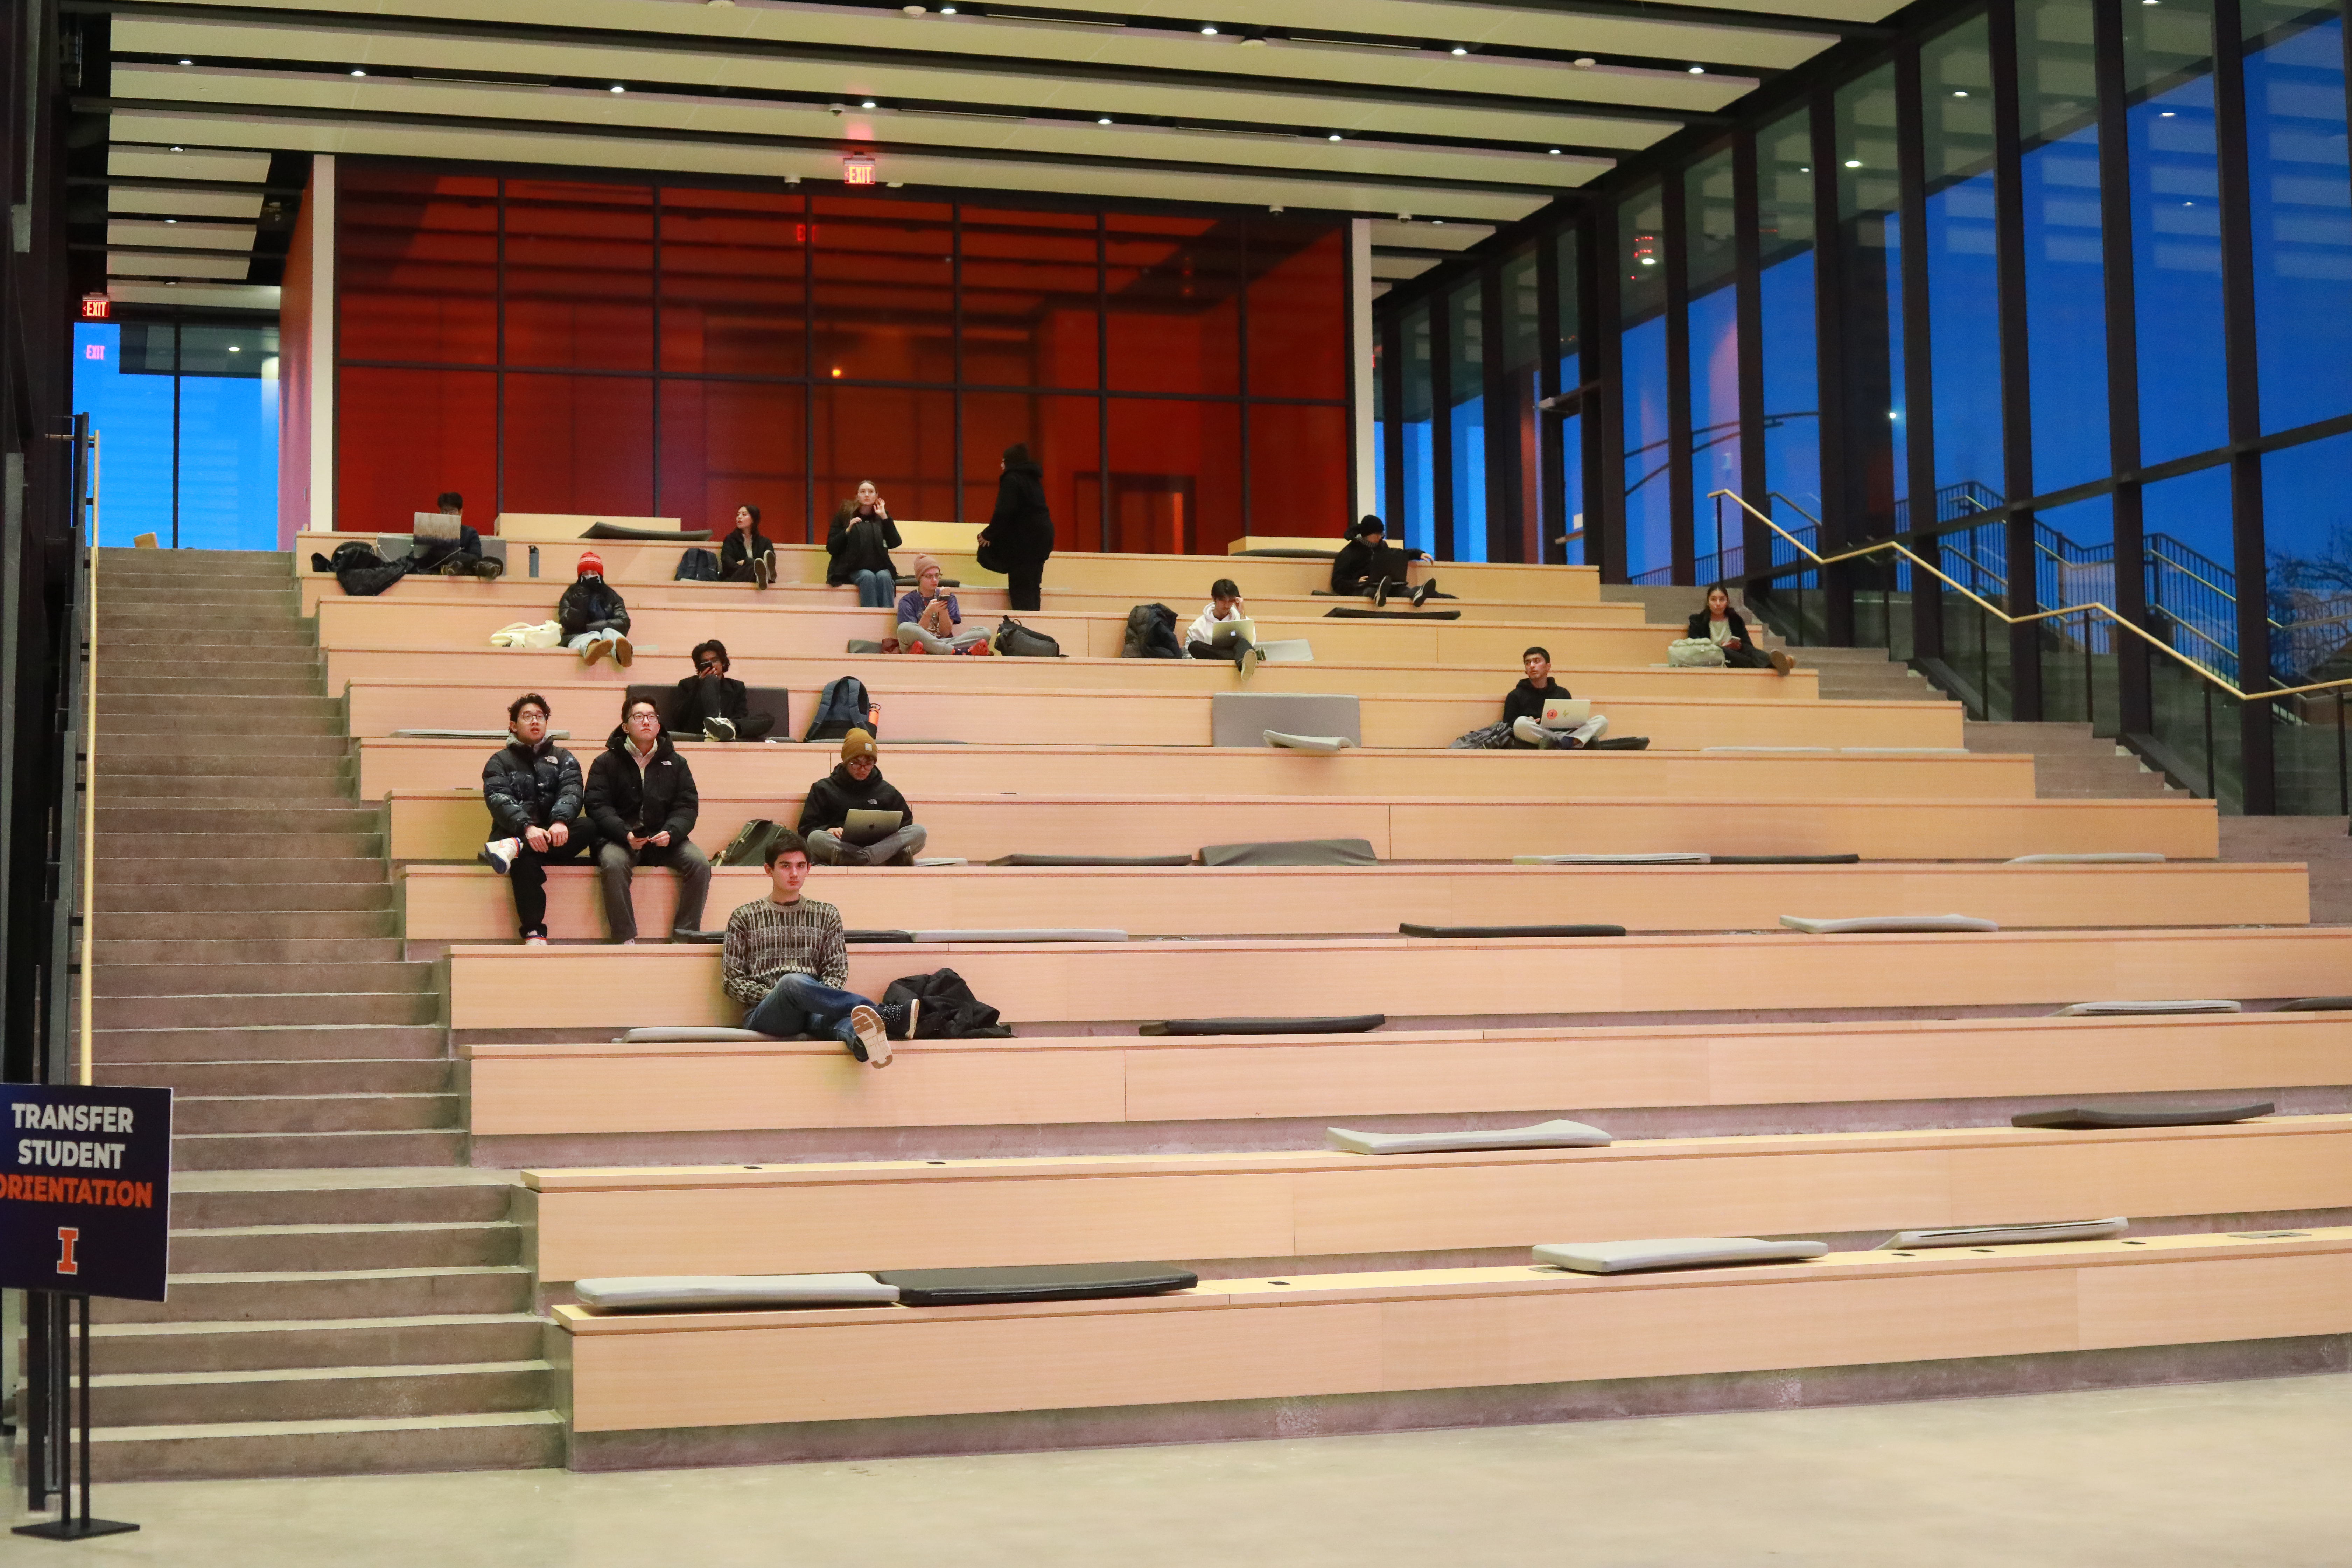 Large room with bleacher-style seating and college students studying